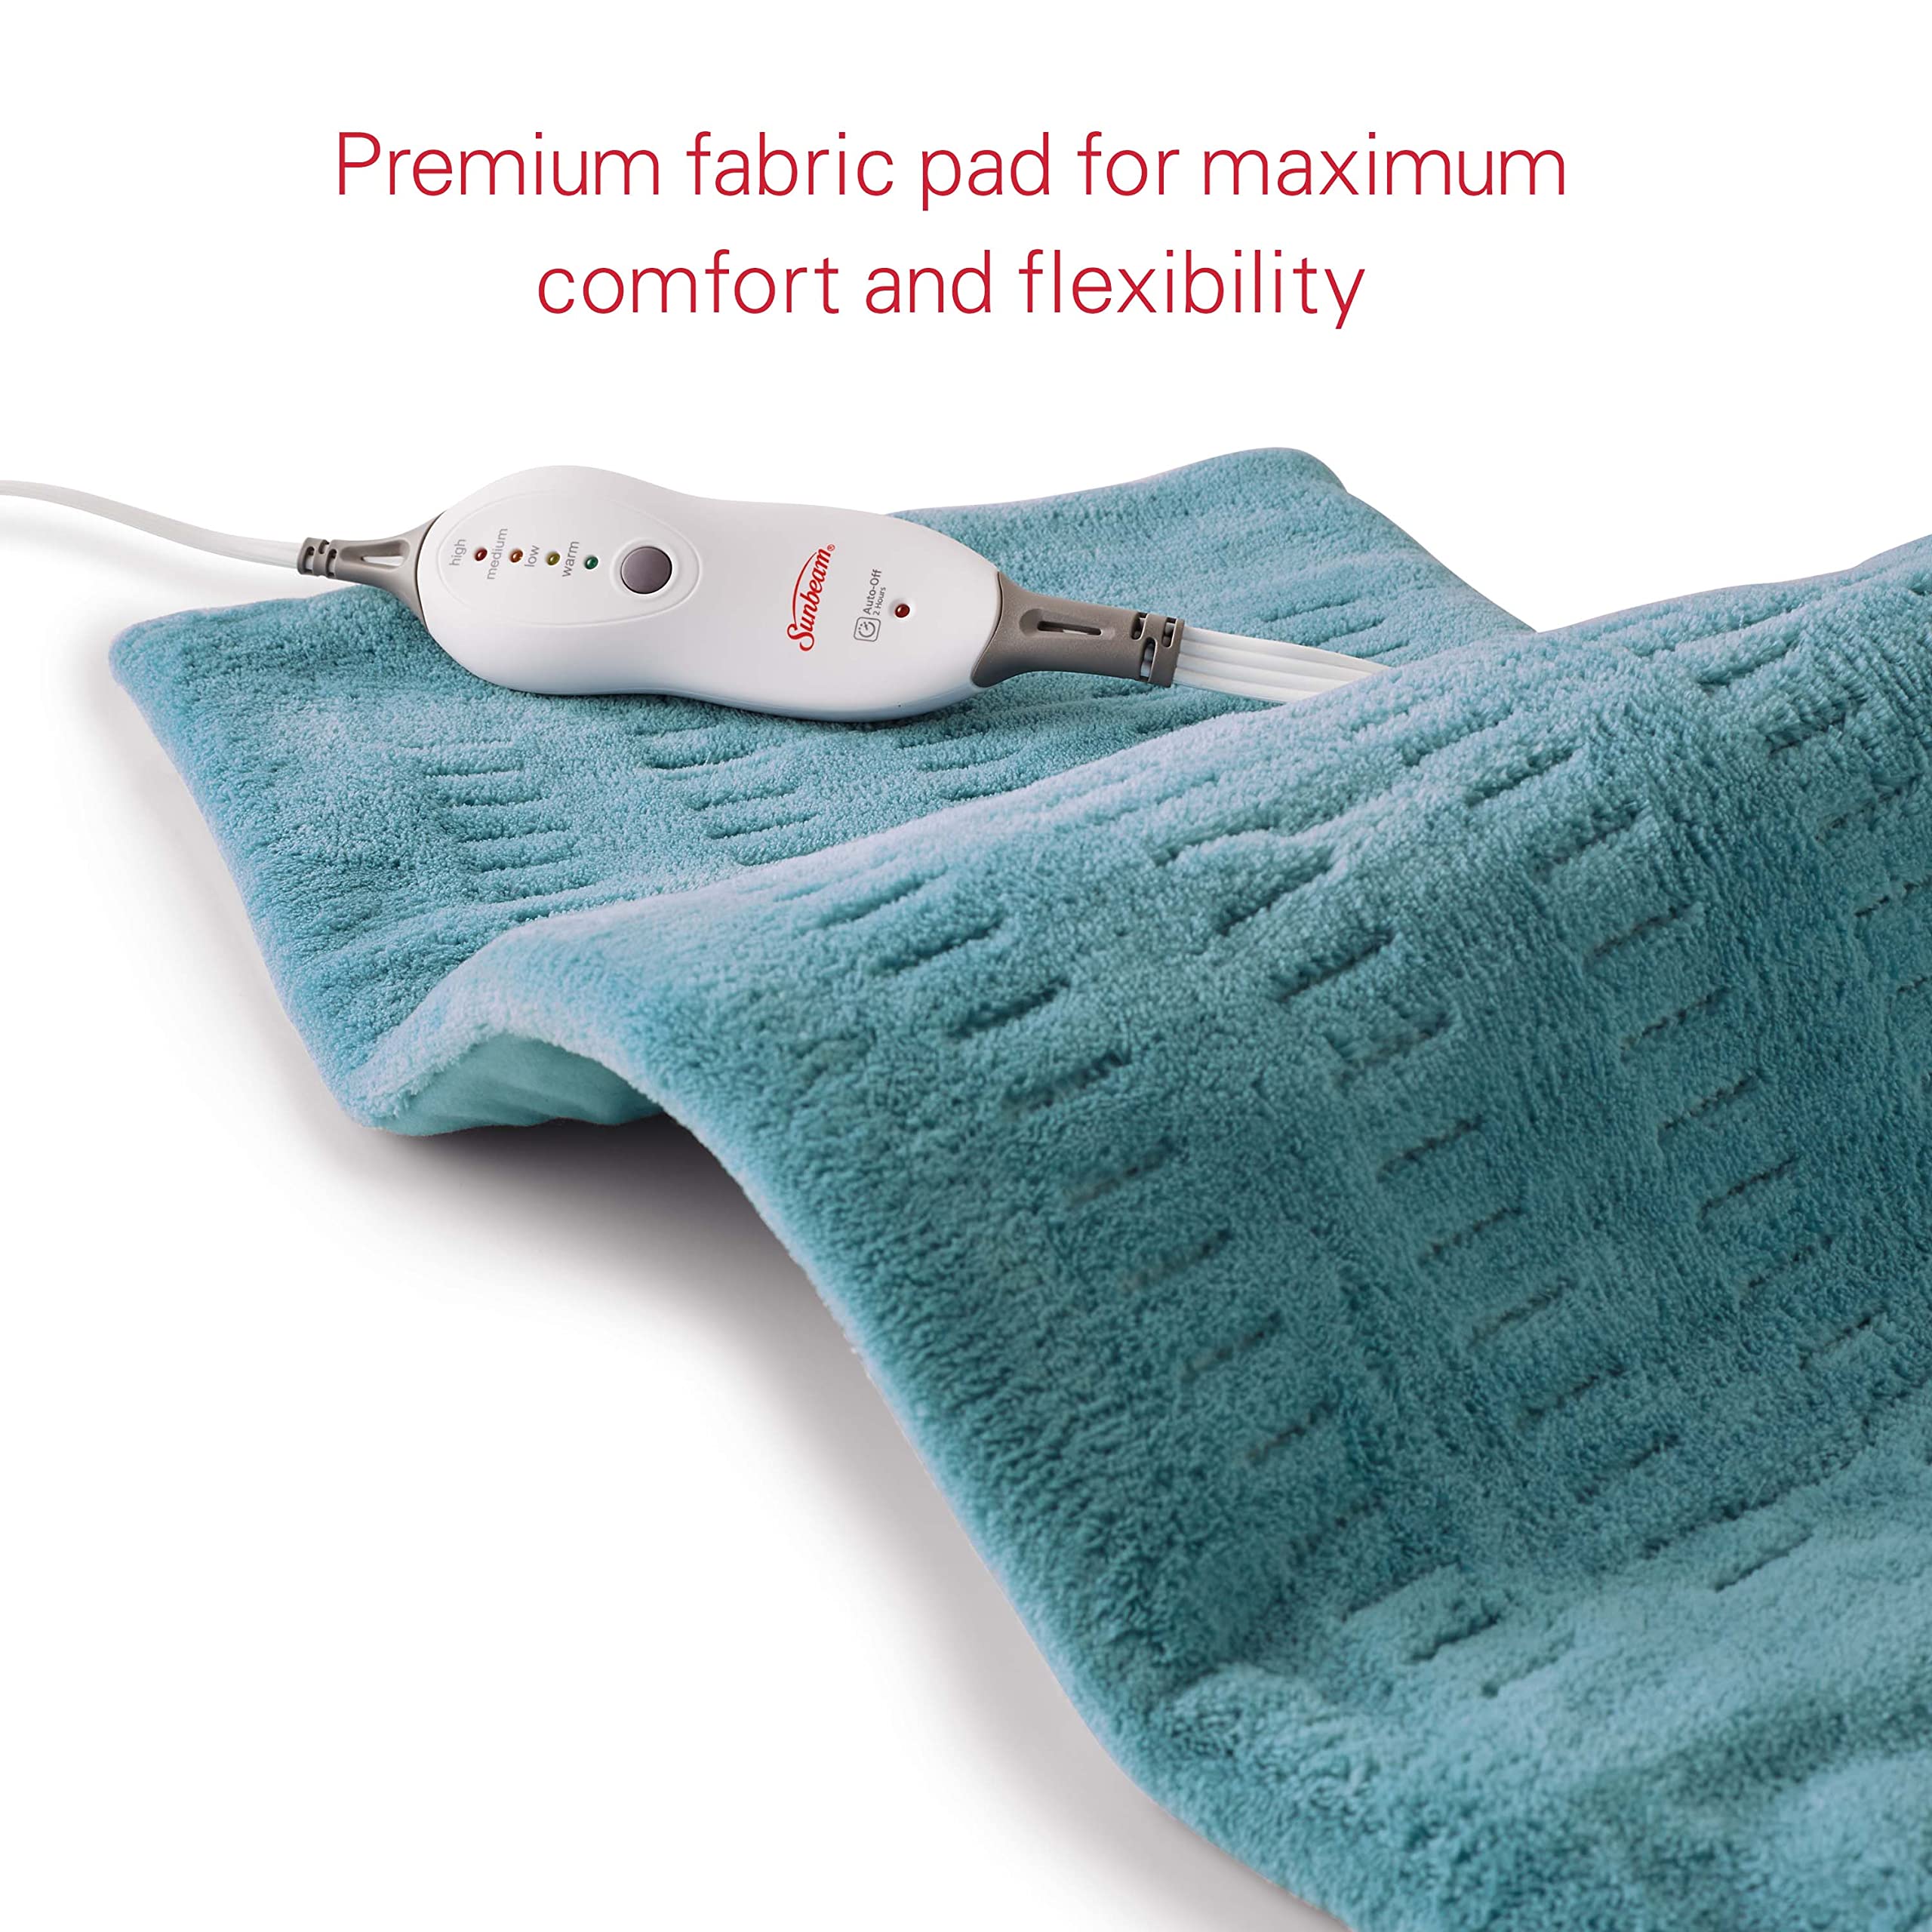 Sunbeam Heating Pad for Back, Neck, and Shoulder Pain Relief with Auto Shut Off, XL 12 x 24